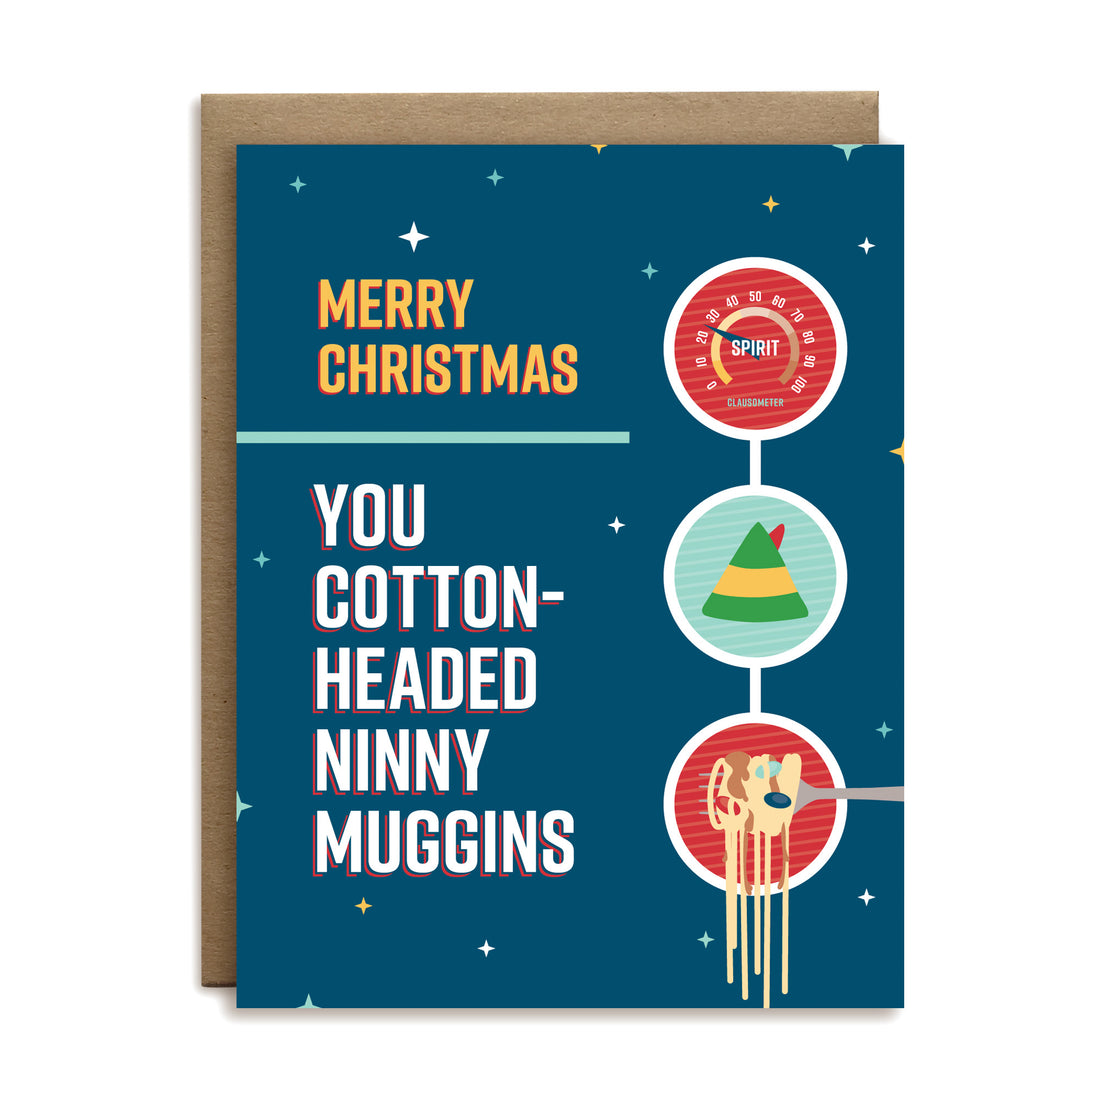 Cotton headed ninny muggins Christmas greeting card by I’ll Know It When I See It